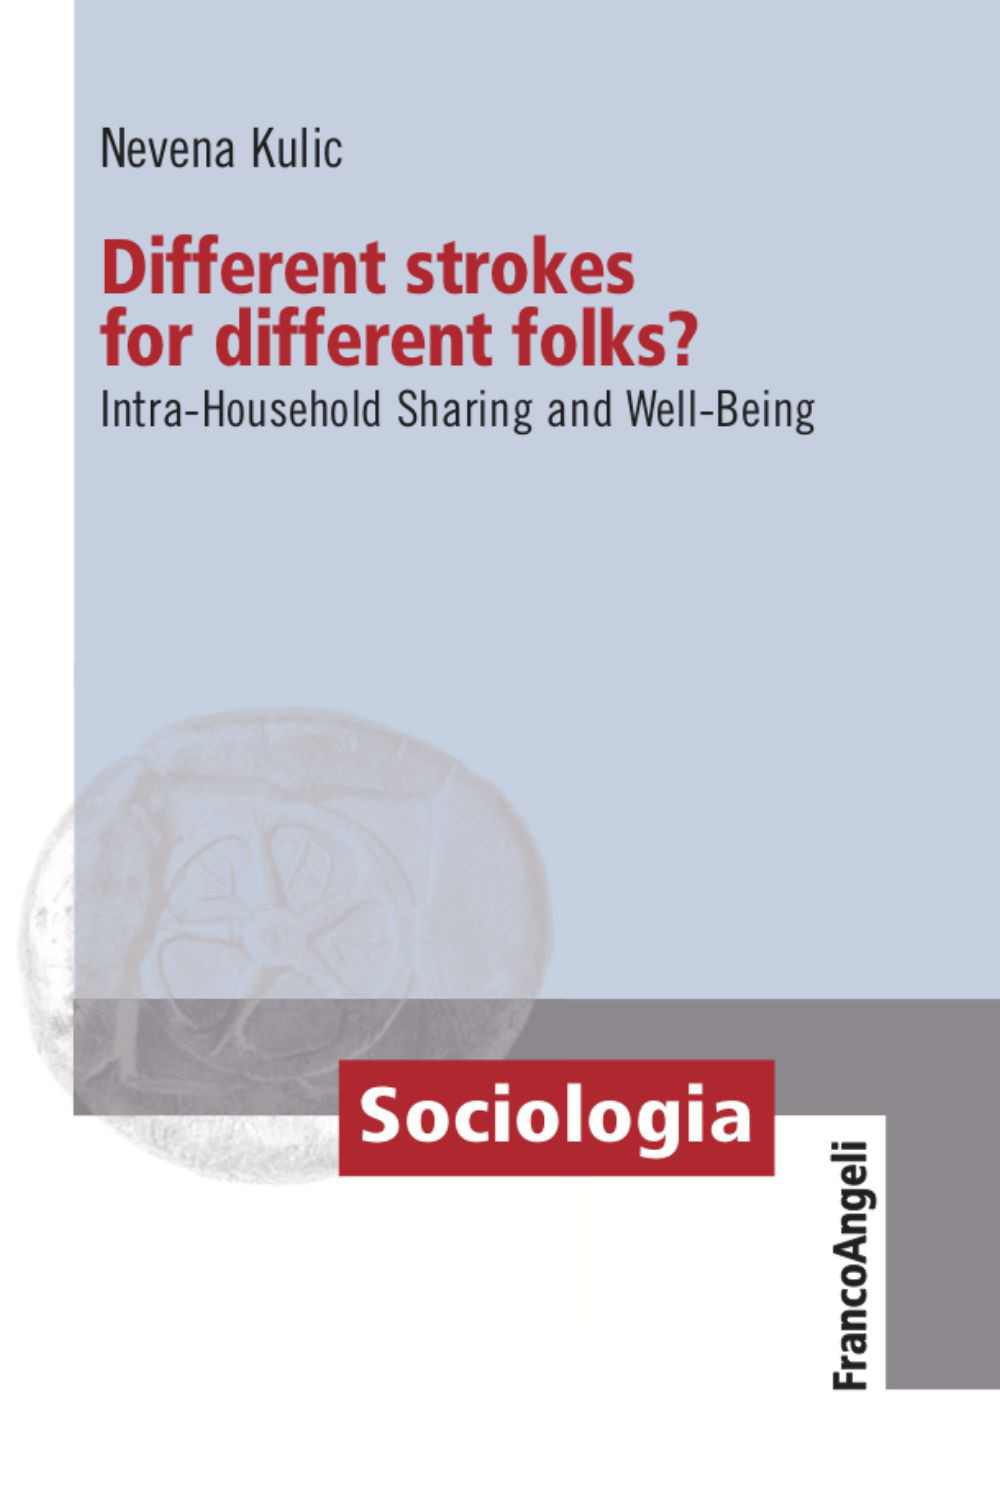 Different strokes for different folks? Intra-Household Sharing and Well-Being